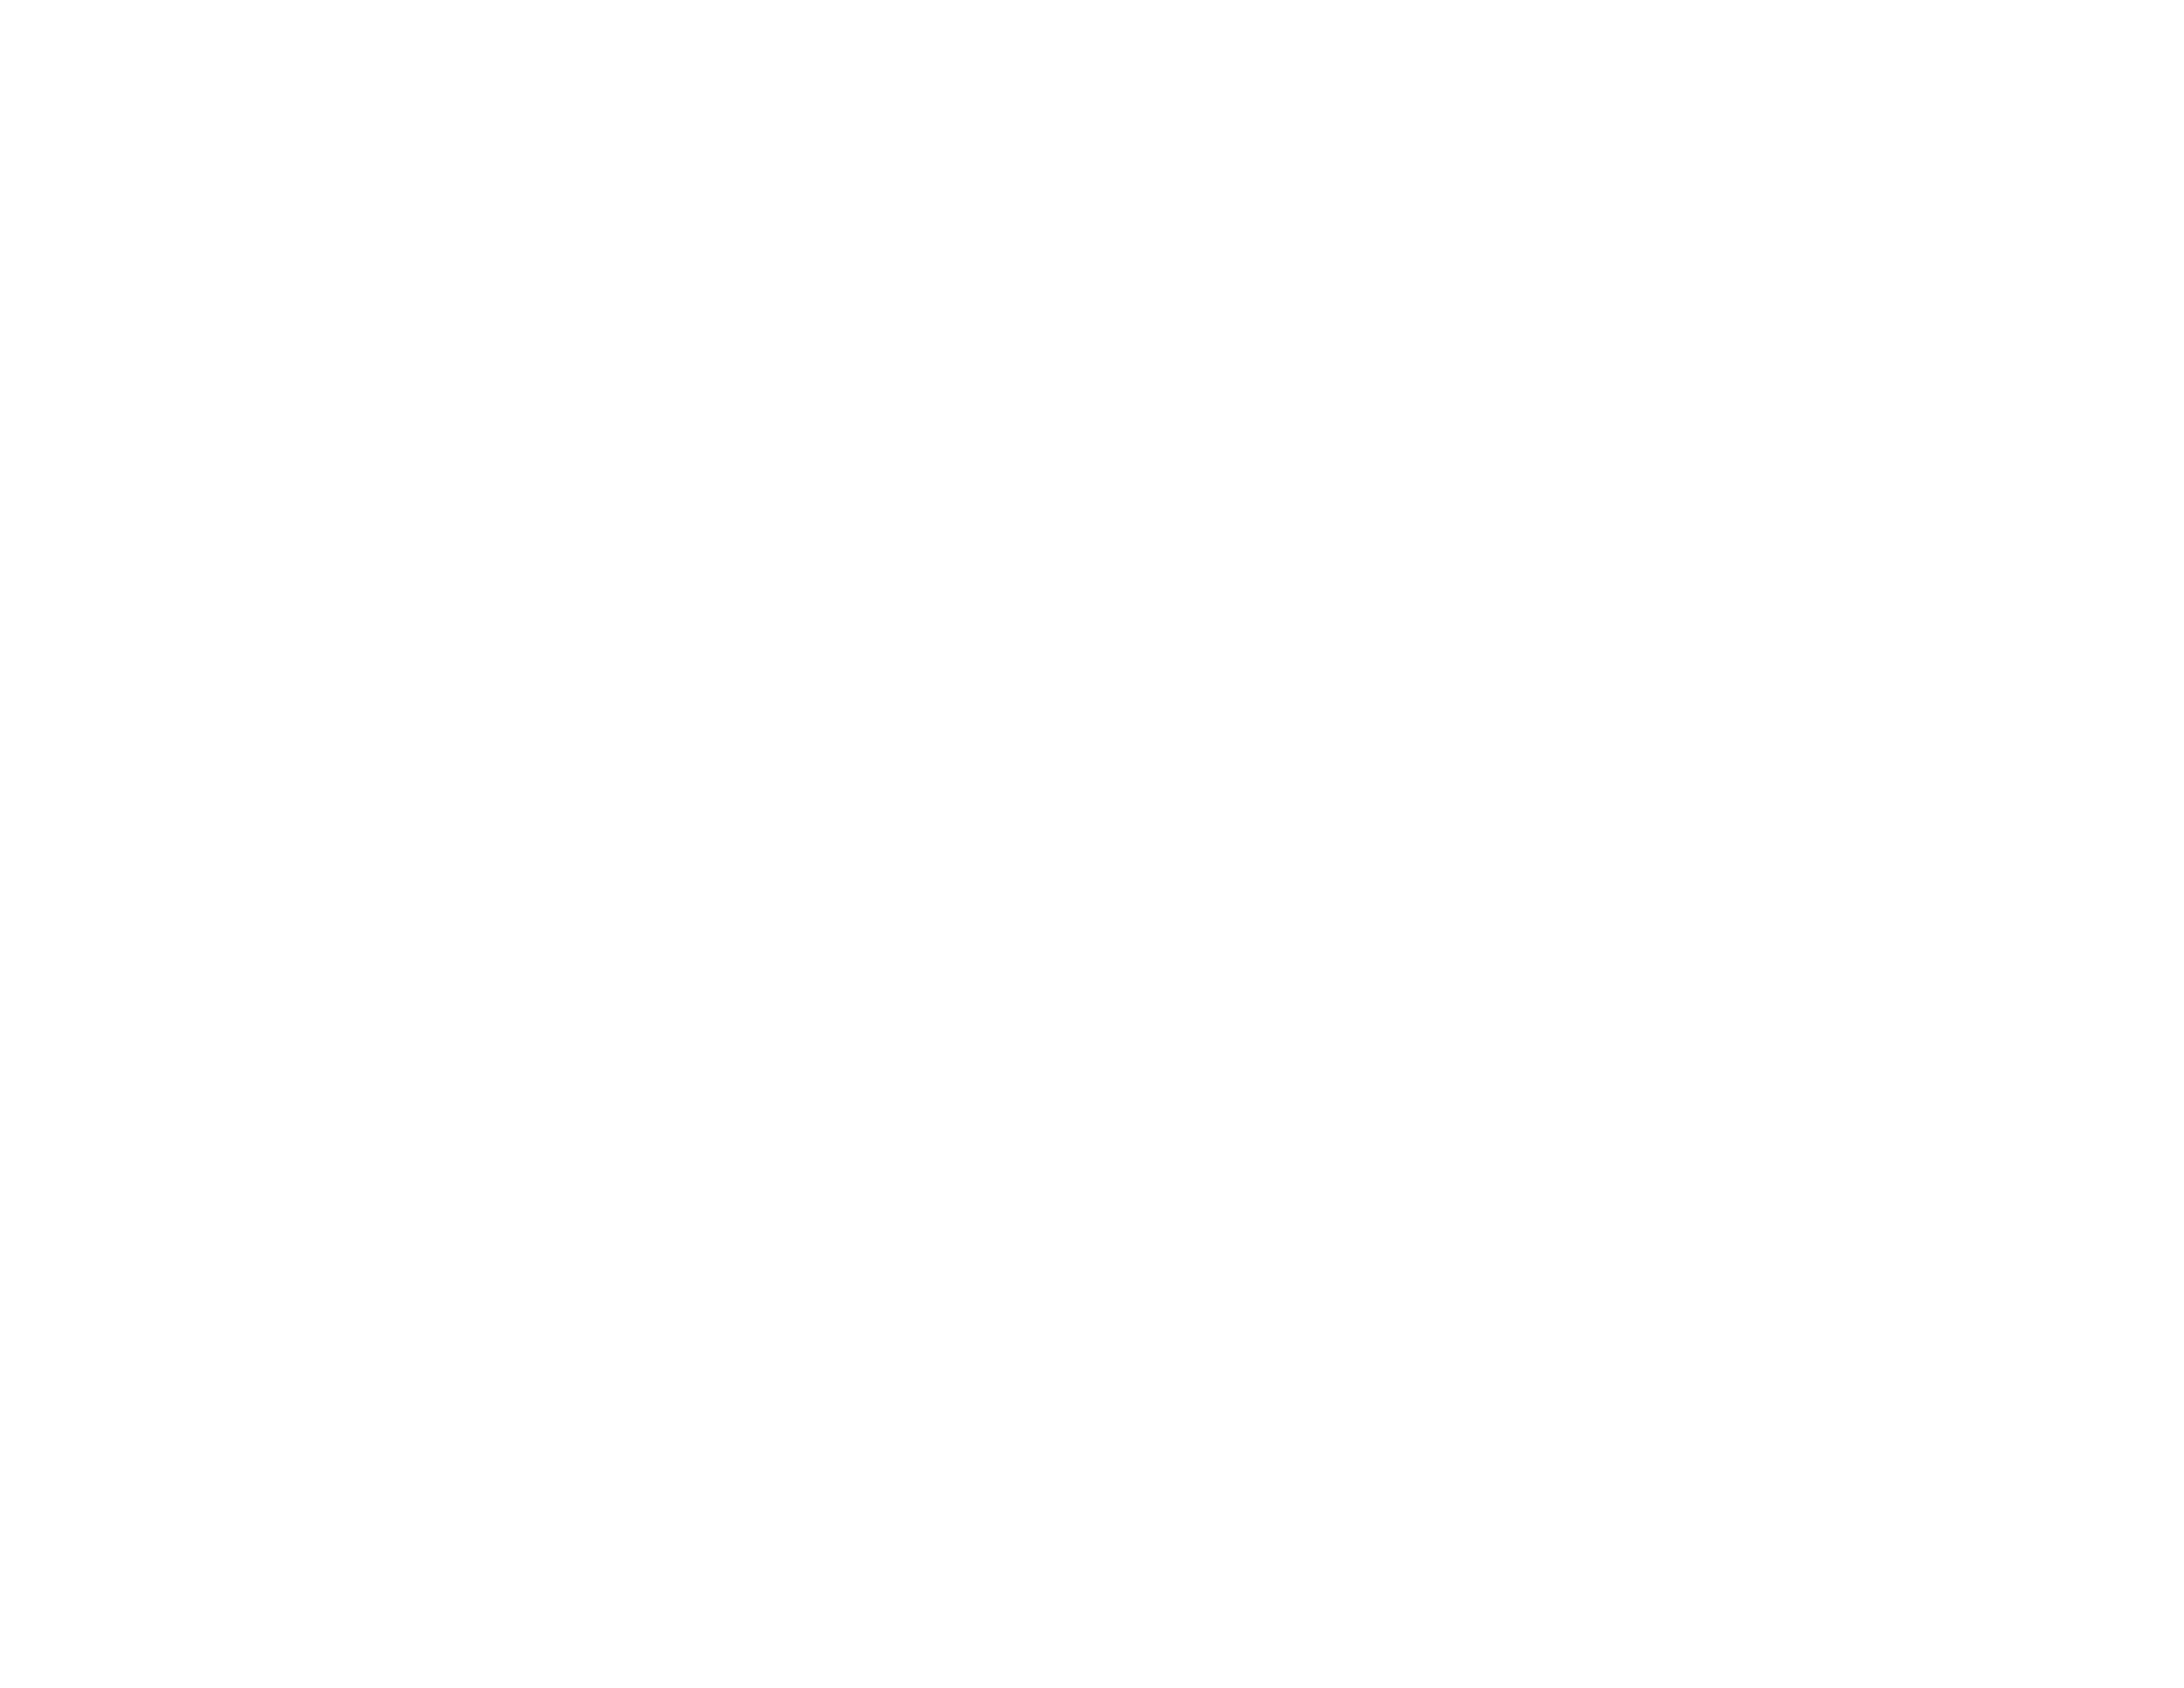 Image of High-Quality Aging